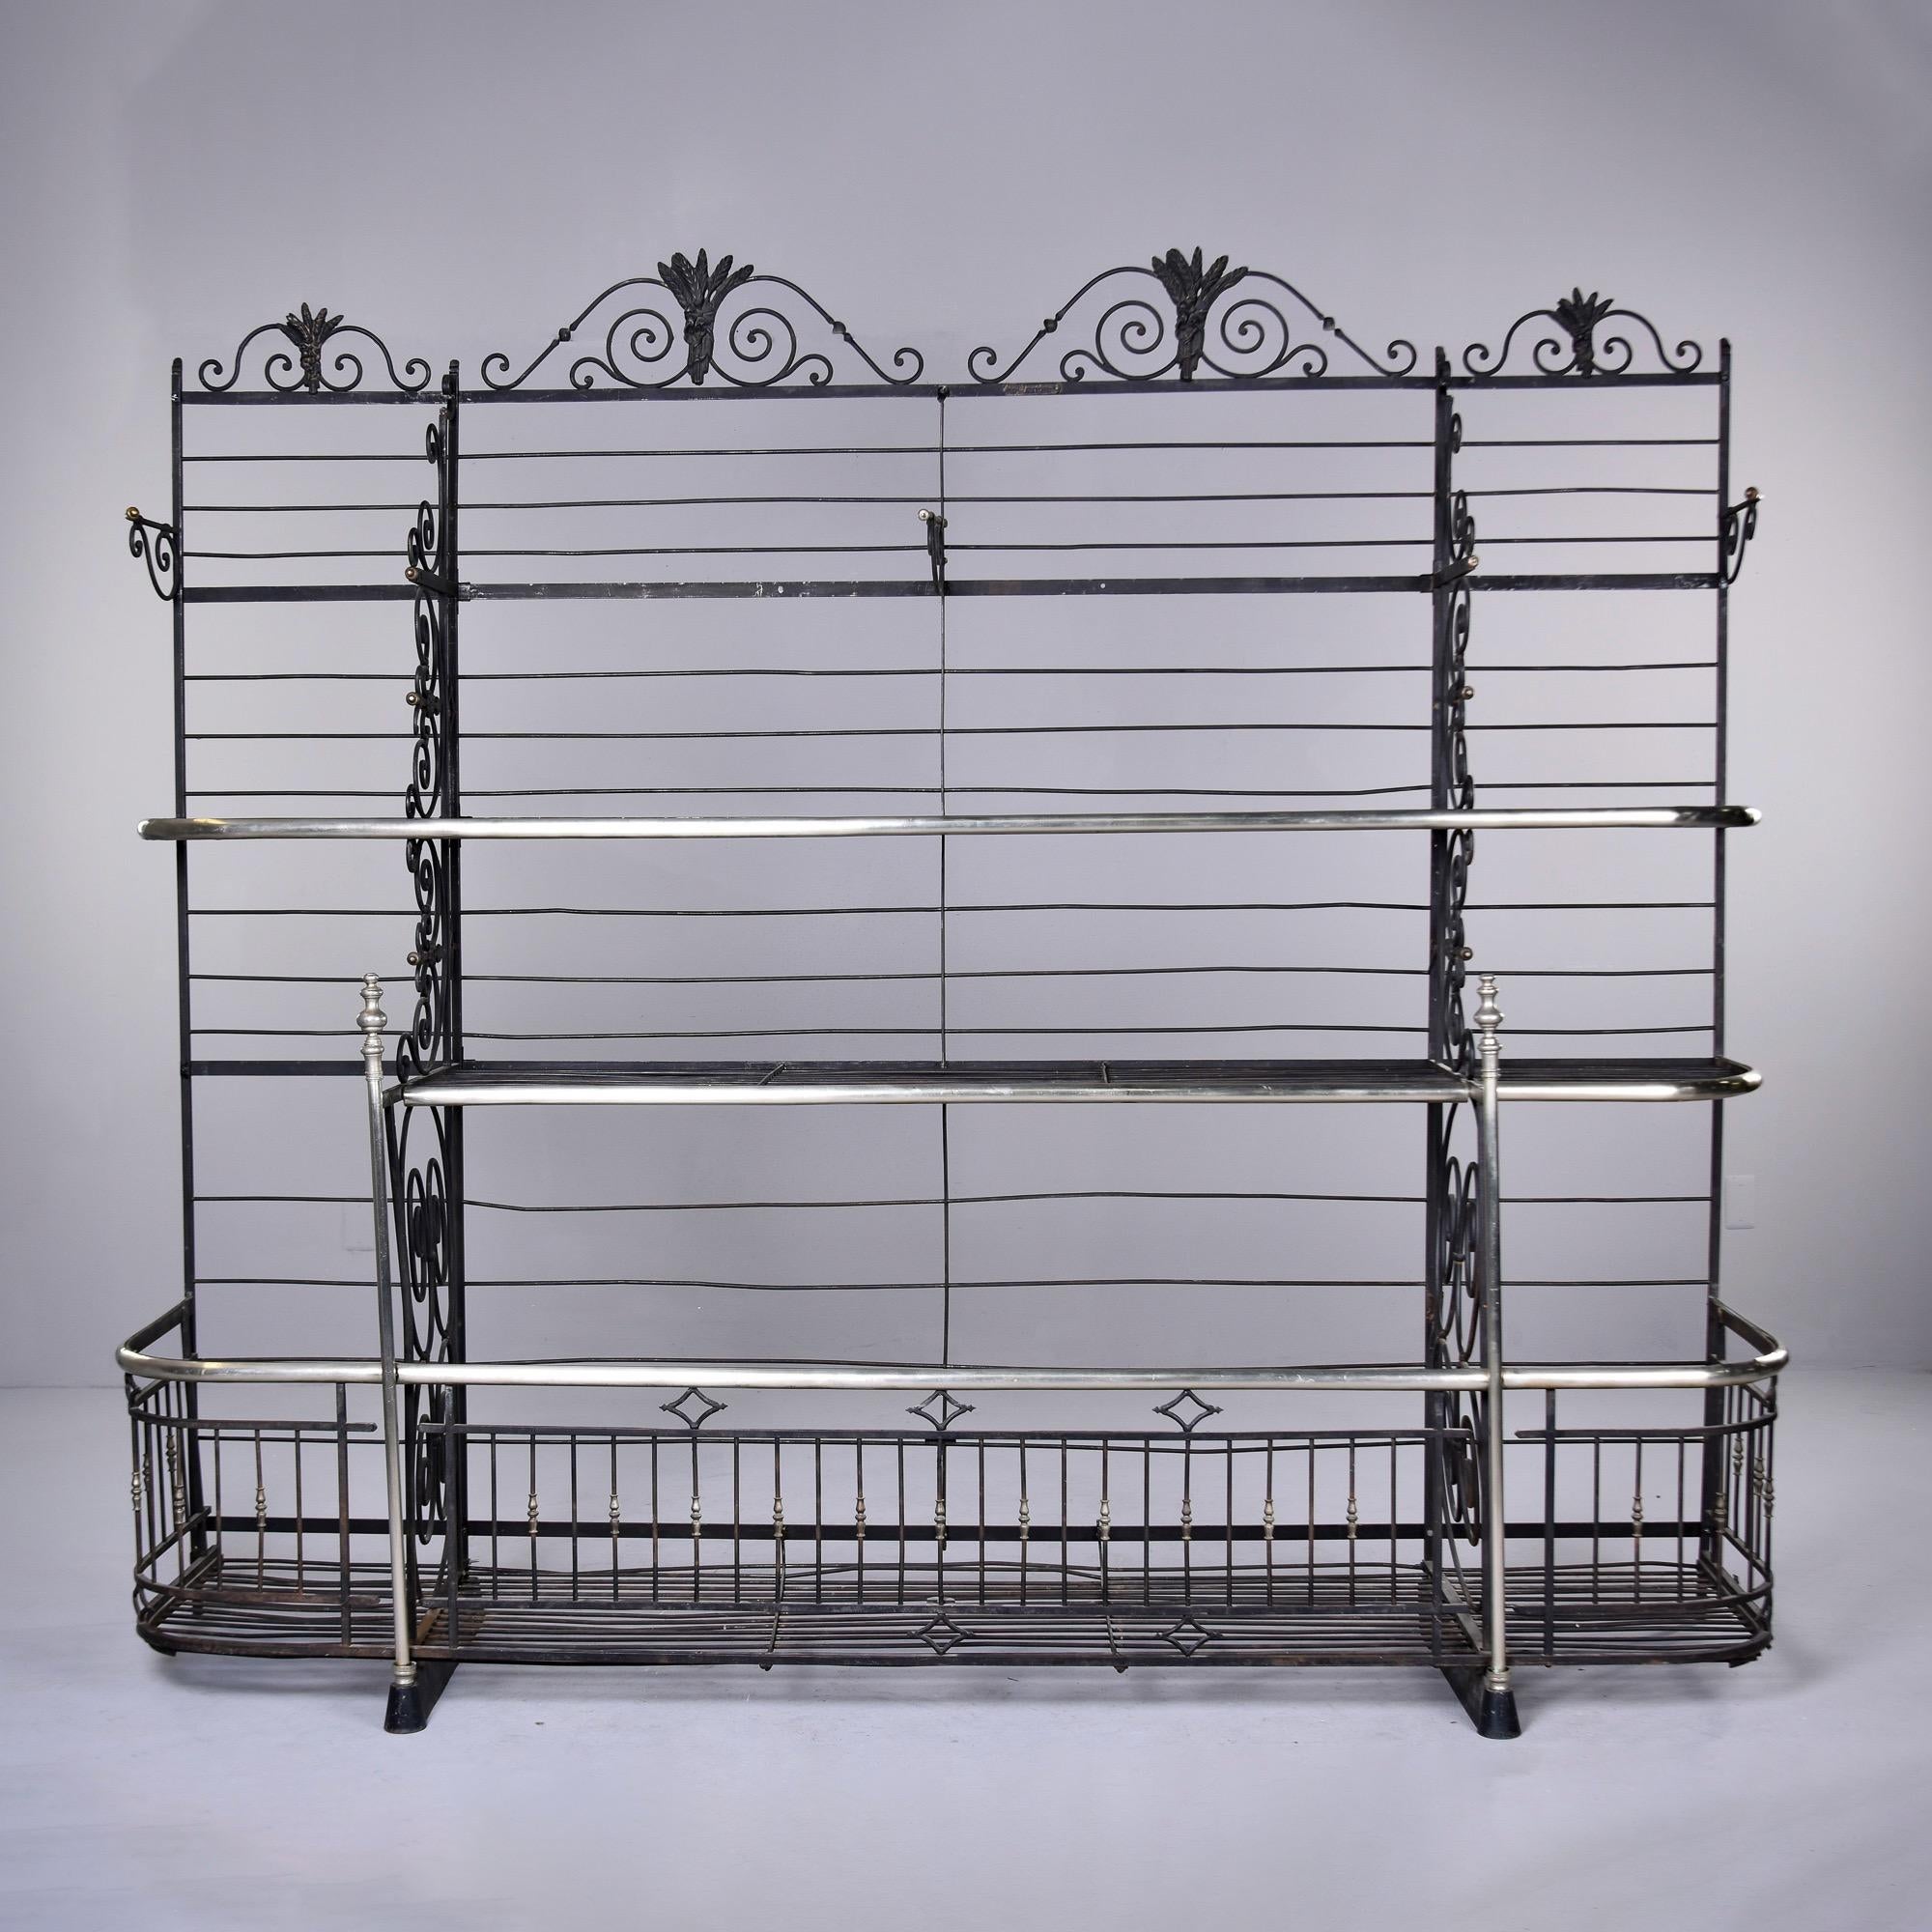 This extra large baker’s rack by Dubois of Lyon, France dates from the 1890s. Grand in scale, this iron and brass alloy rack is over 8 feet wide and 7 feet tall. It has three large open bins at the bottom with two shelf tiers above. Intricate scroll